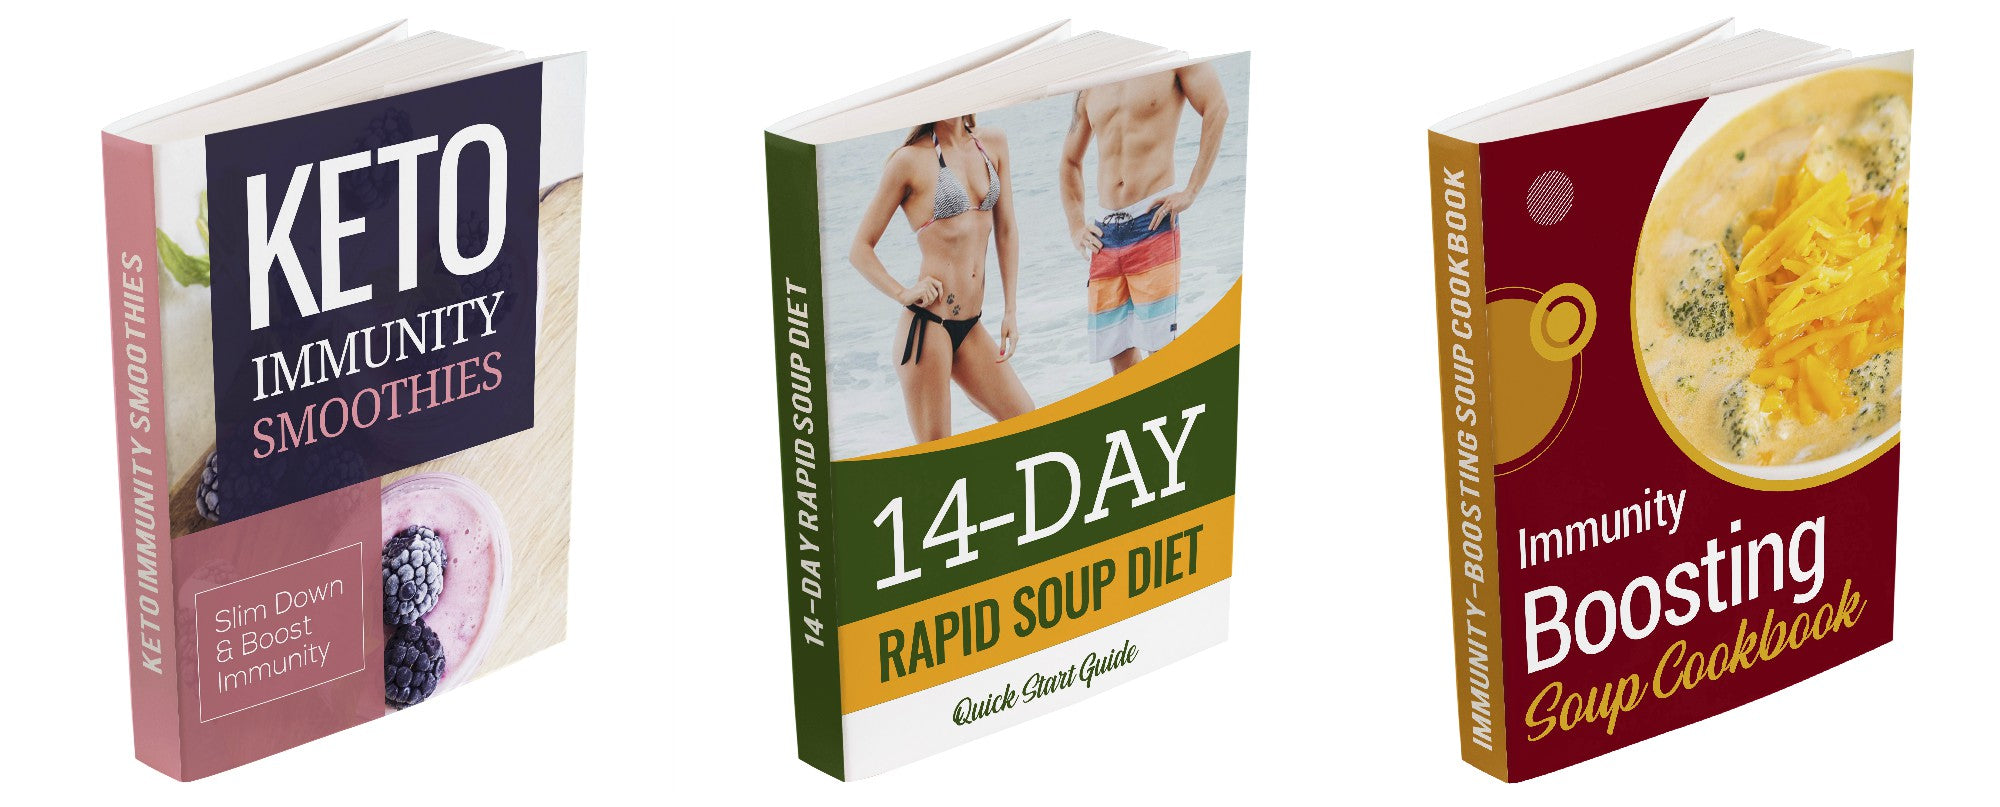 Lose Belly Fat Fast - 14 Day Rapid Soup Diet